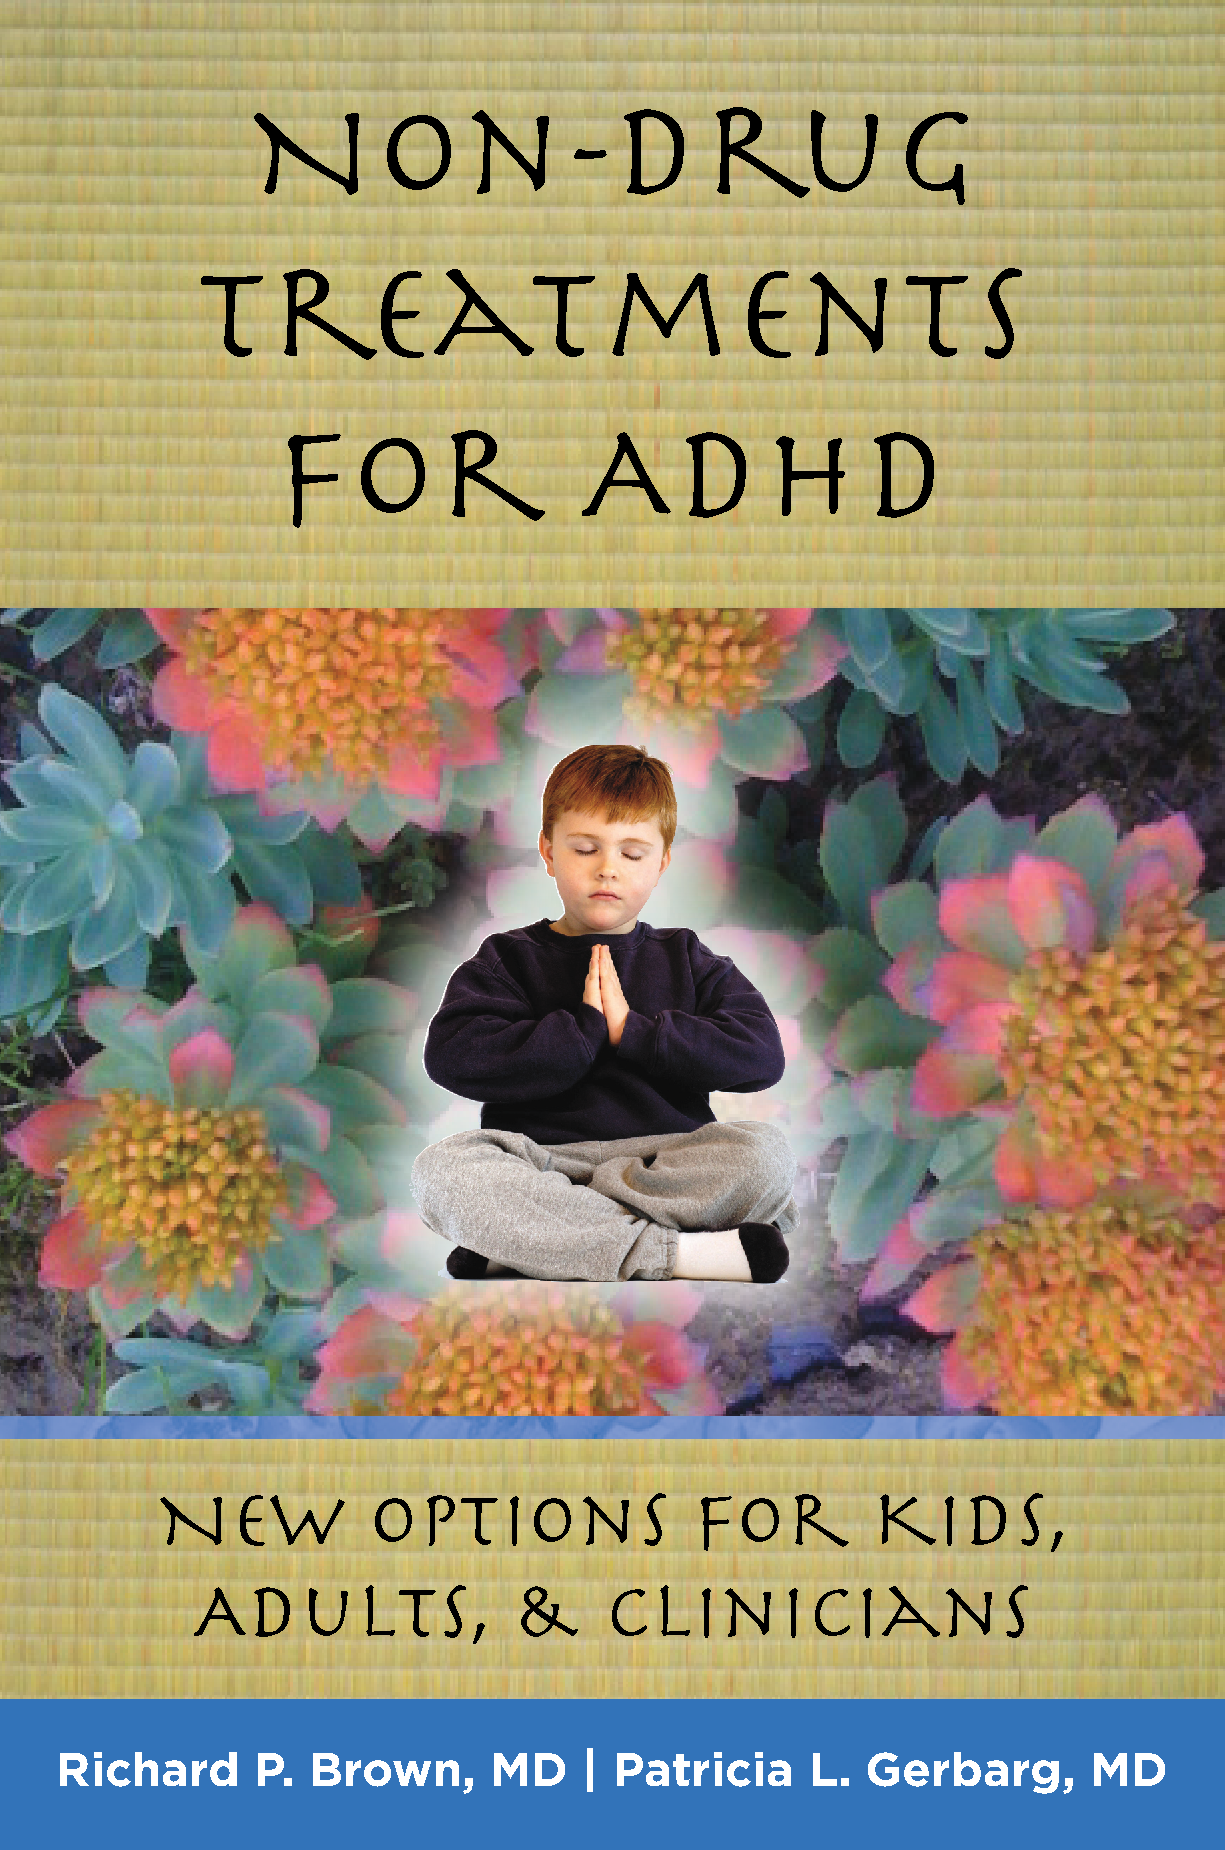 ADHDcompsreviseCover1-21-12.png